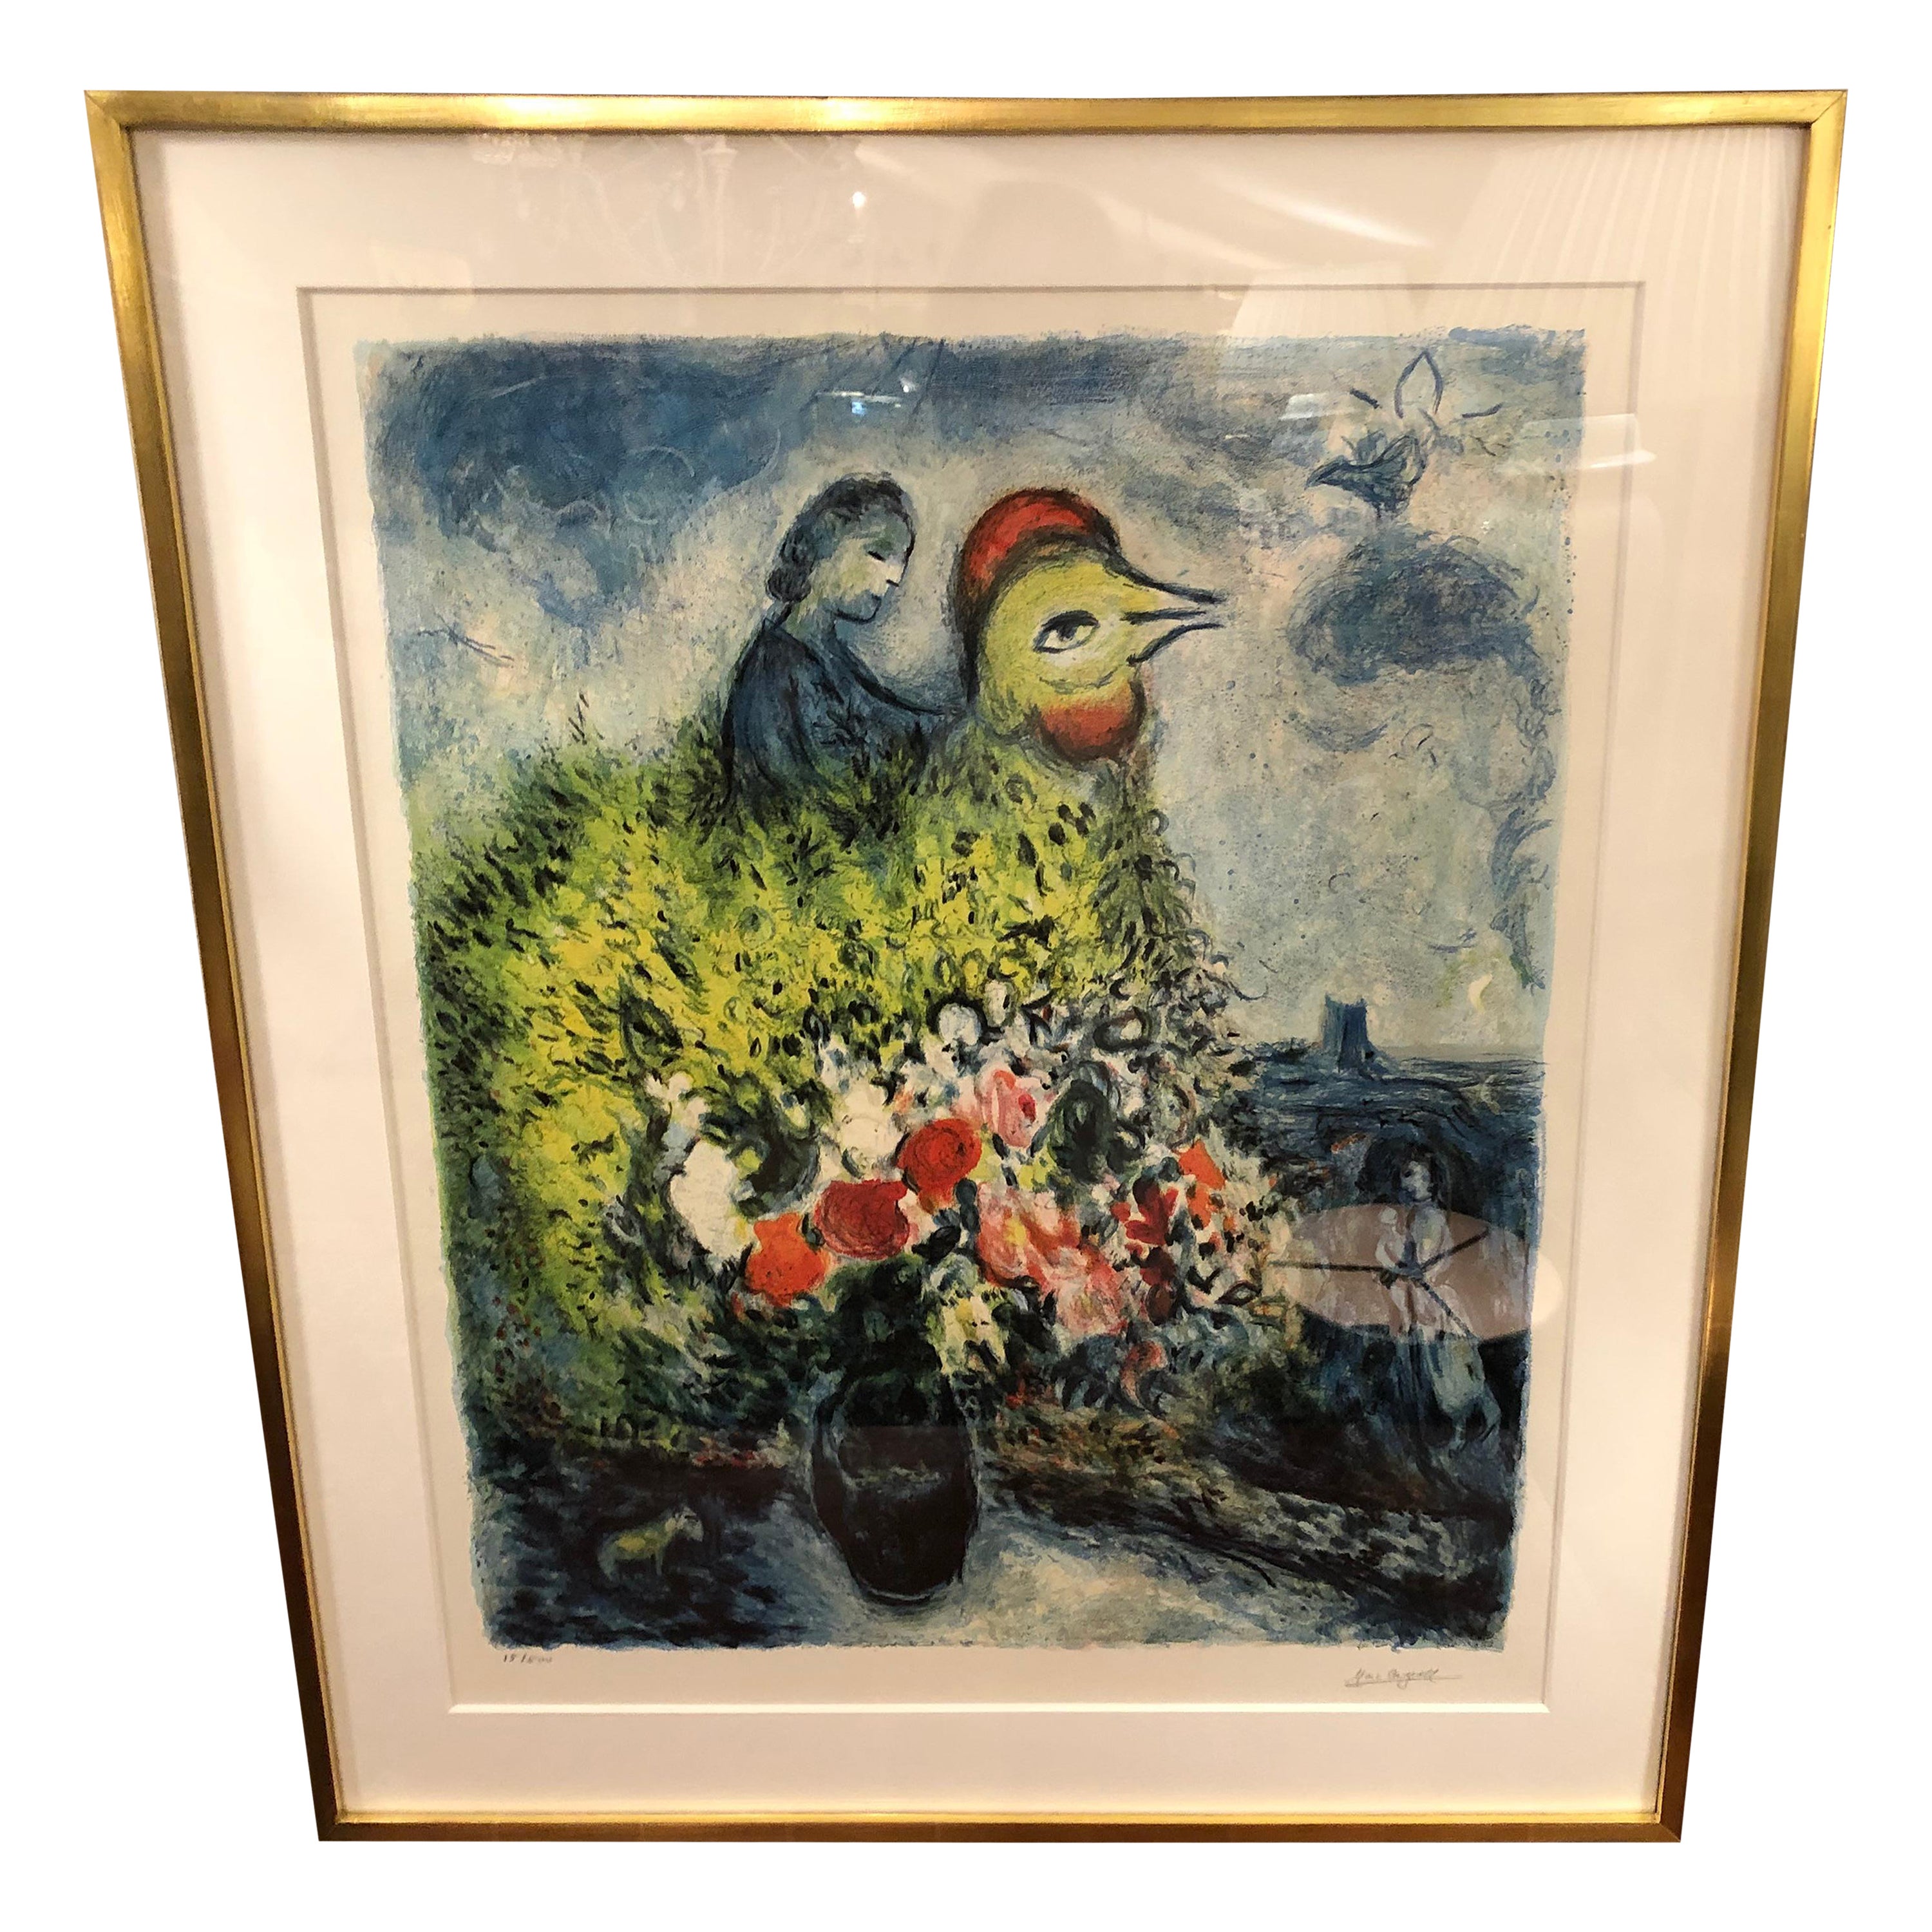  Chagall Print Le Coq Avec Le Bouquet Jaune Signed and Numbered Limited Edition For Sale